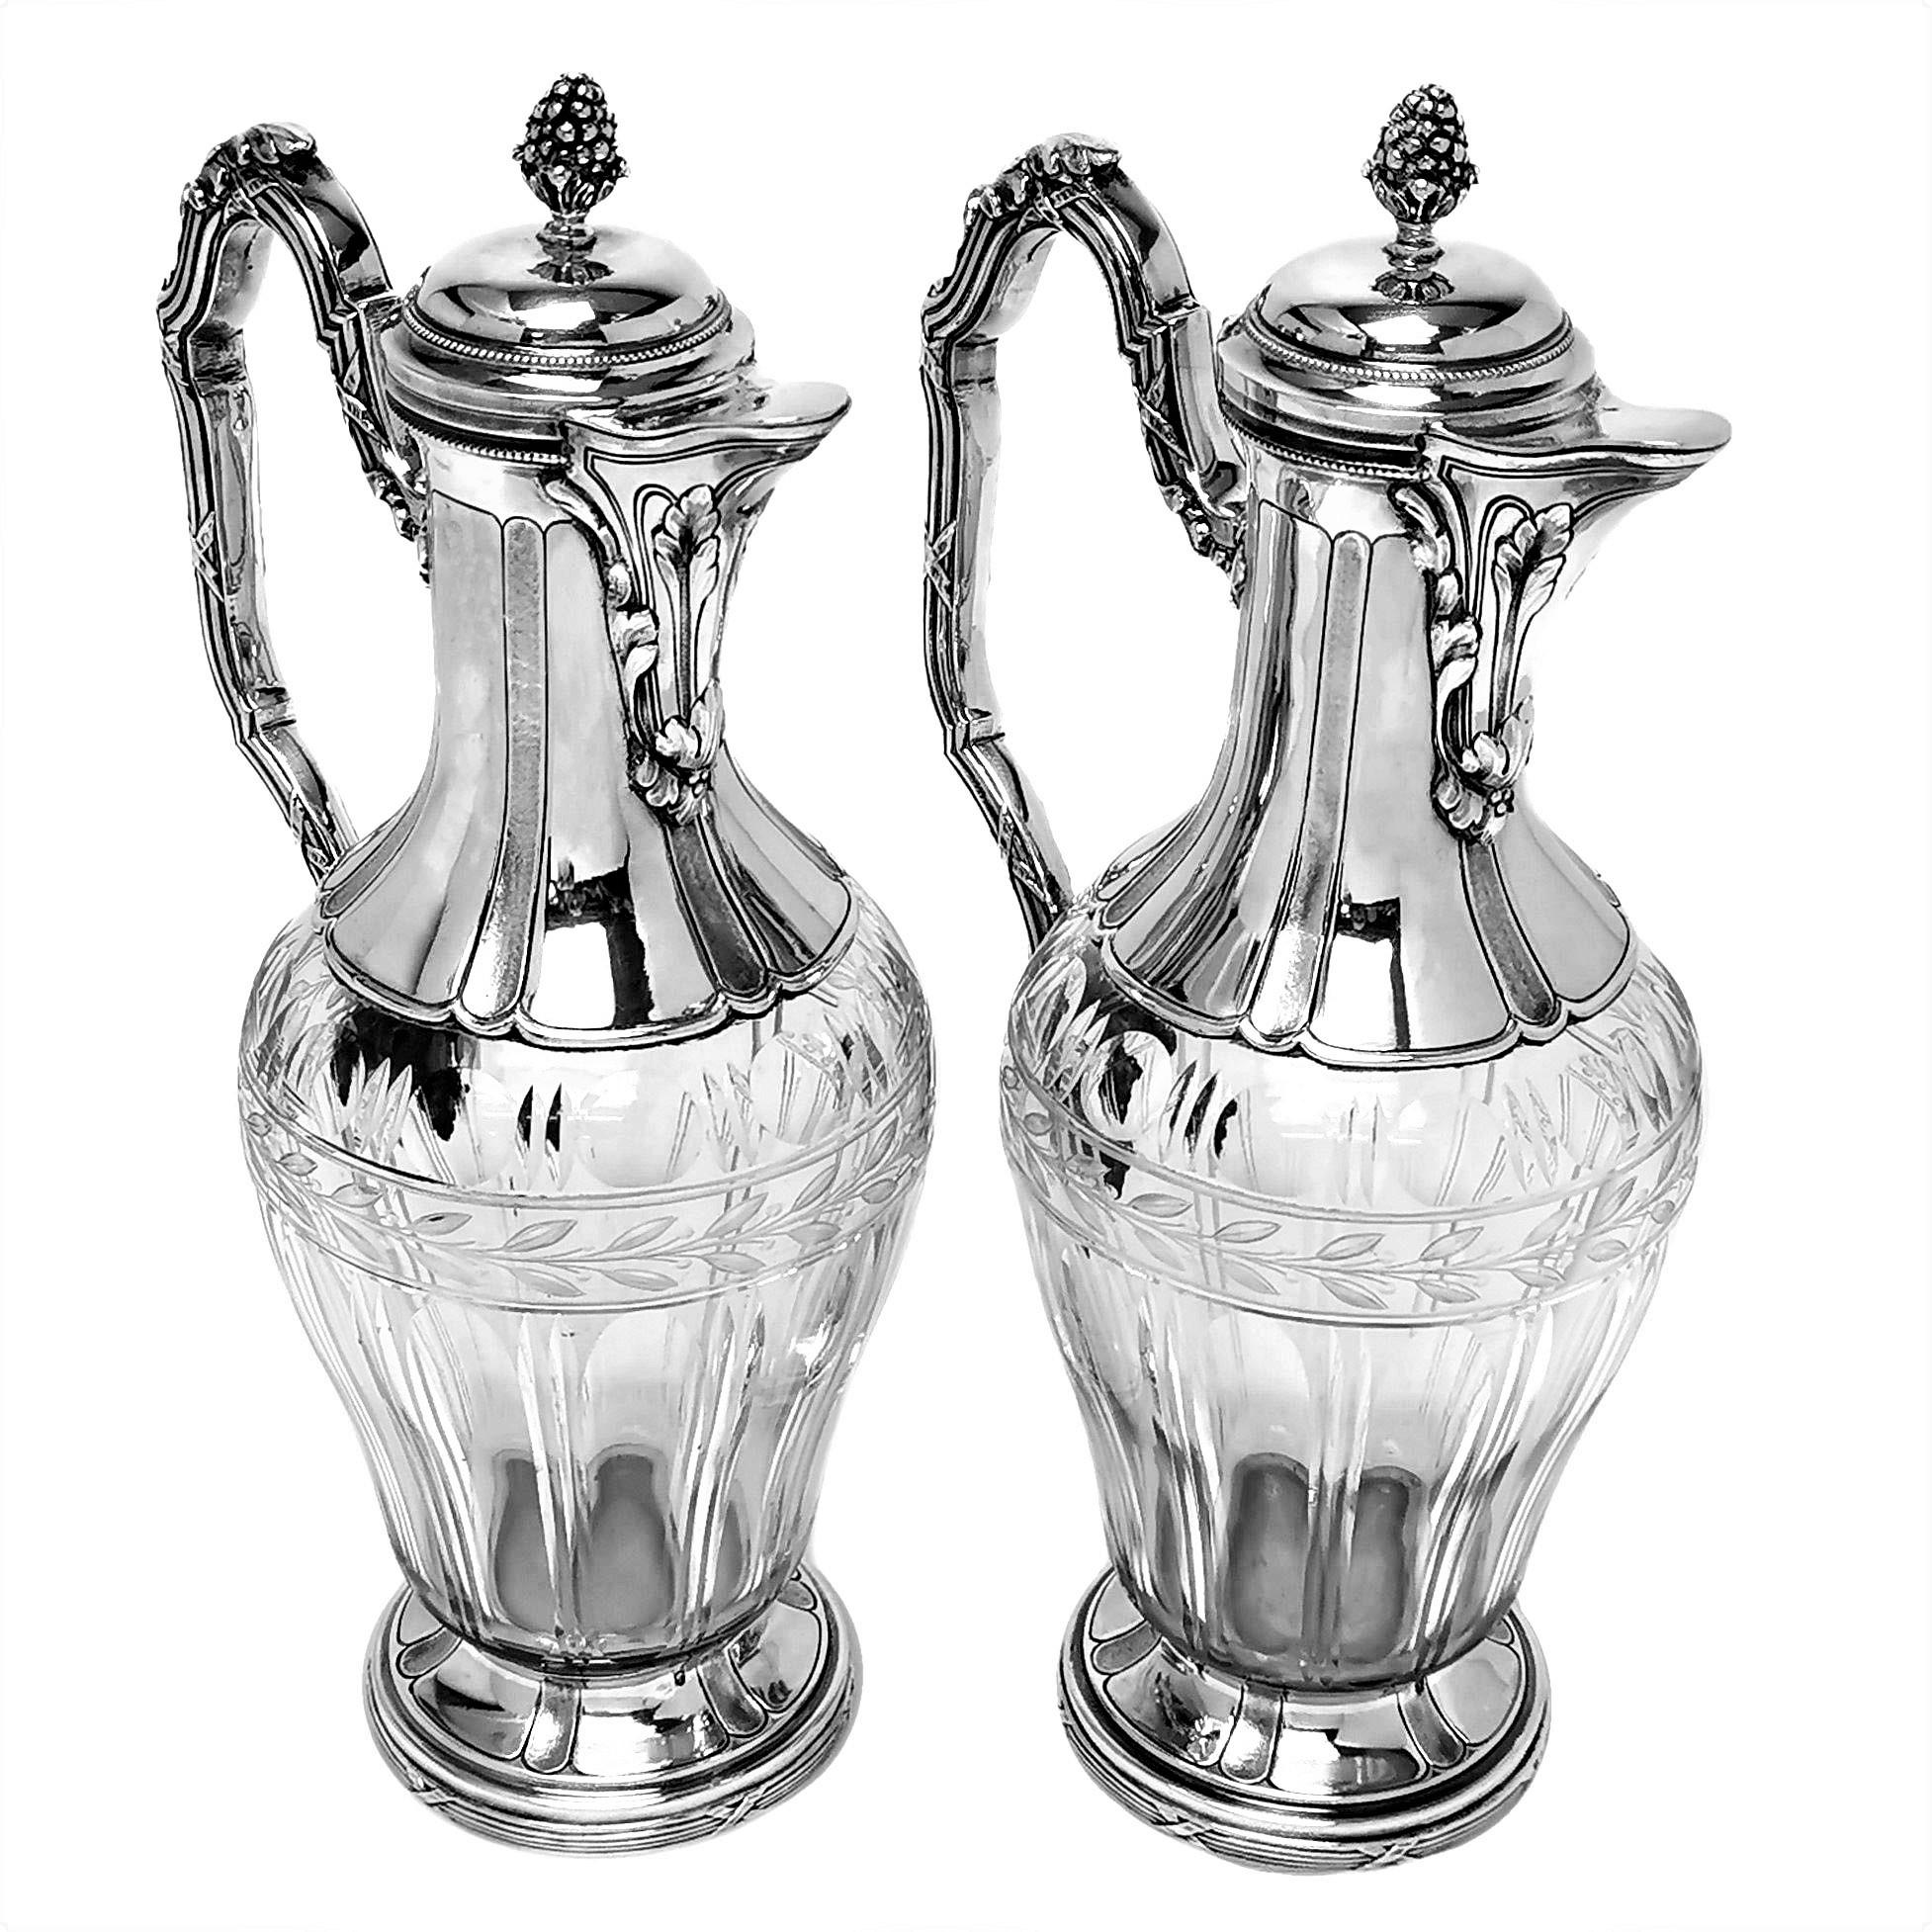 A pair of elegant Antique French silver & glass Claret Jugs. The bodies of these Wine Jugs feature lovely cut glass patterns which complement the patterning on the foot and neck of the Wine Jugs. The foot and handle of the Ewers are embellished with